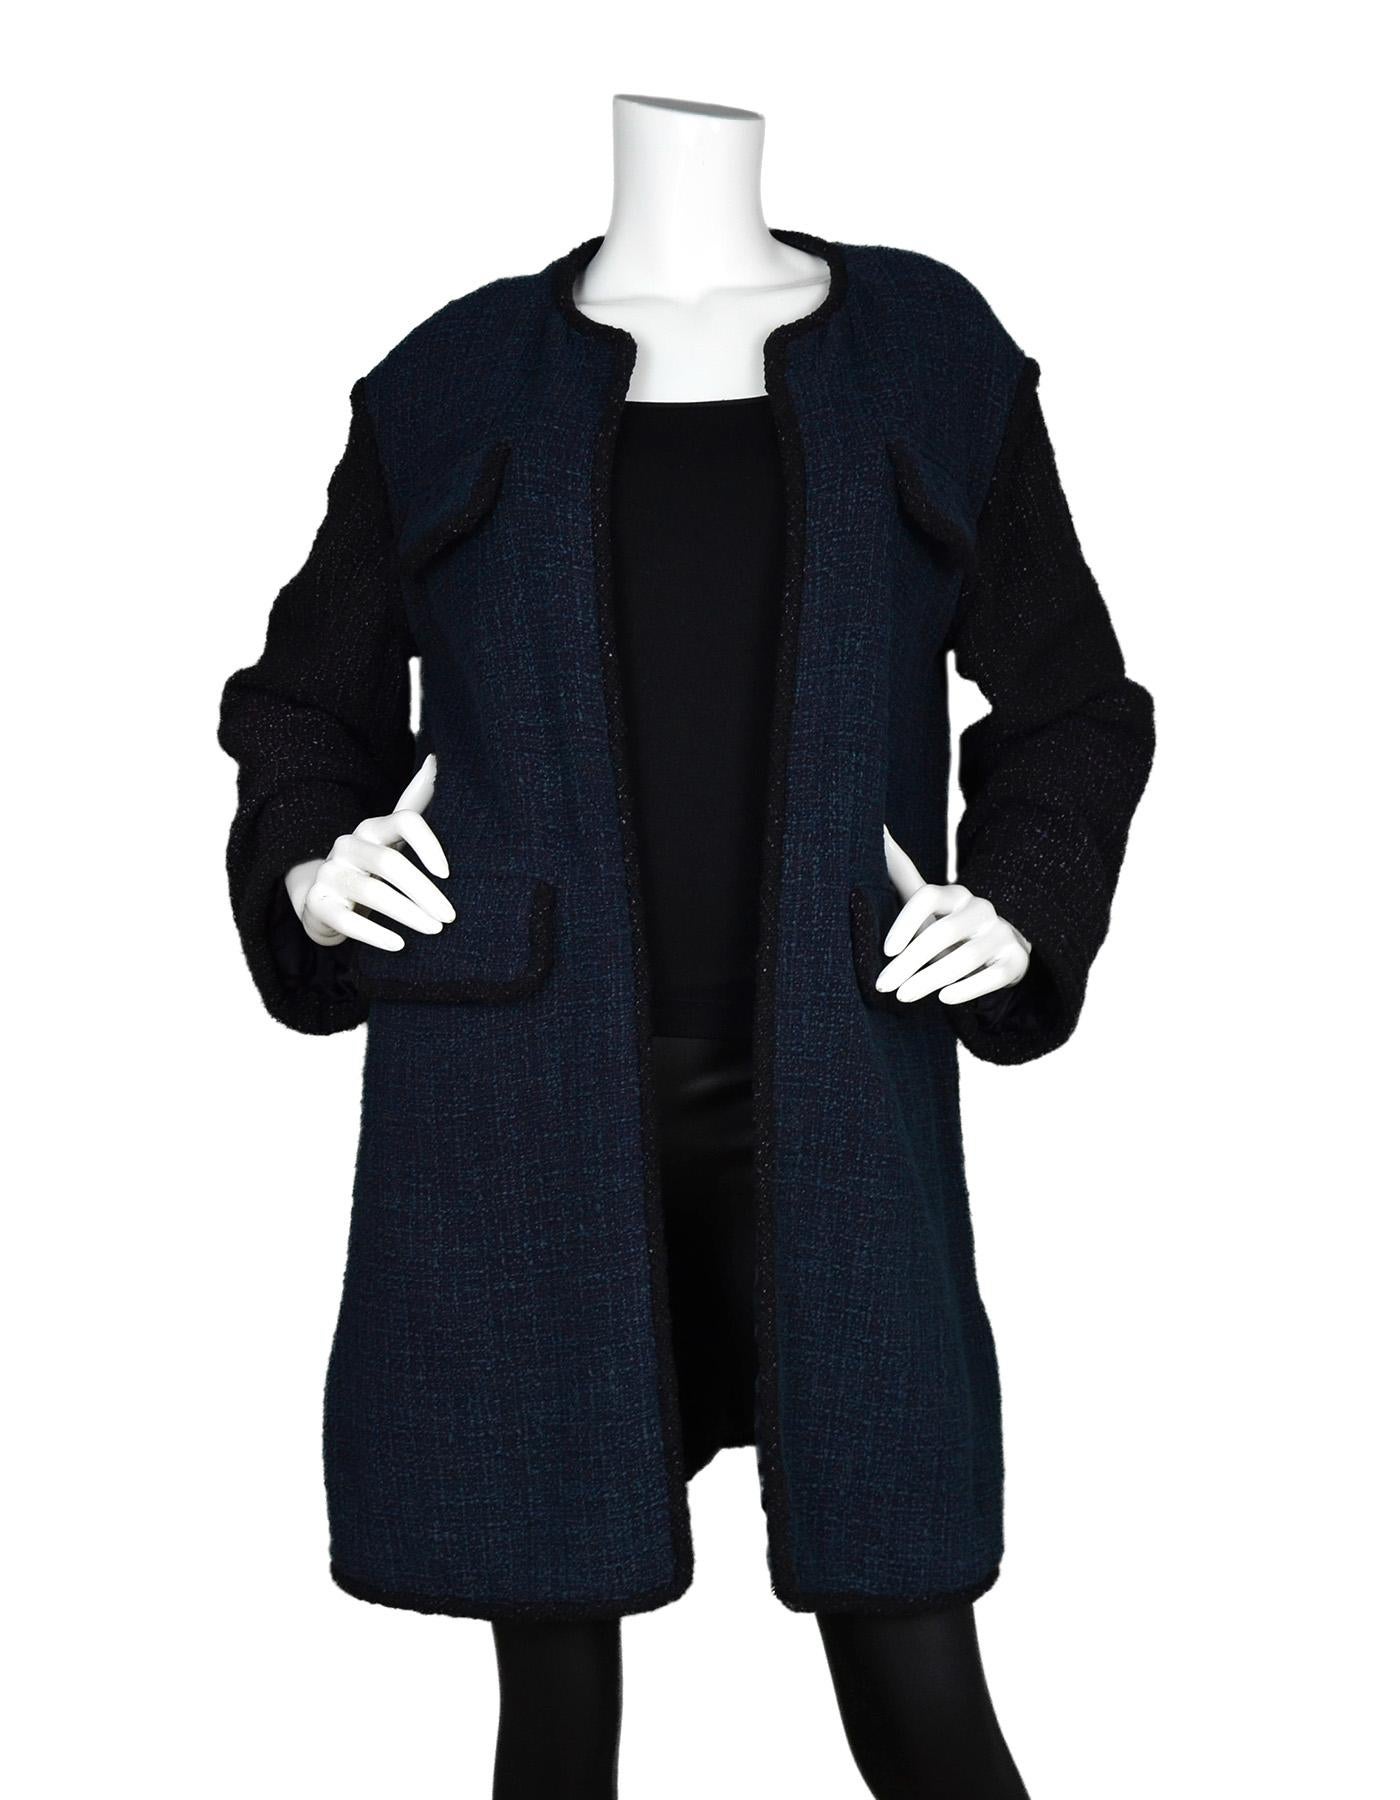 Chanel Navy Blue /Eggplant Purple Boucle Tweed Open Coat Sz 38

Made In: France 
Color: Navy blue and eggplant purple
Materials: 90% cotton, 10% rayon
Lining: 100% silk, jacquard logo and floral lining 
Opening/Closure: Open front
Overall Condition: